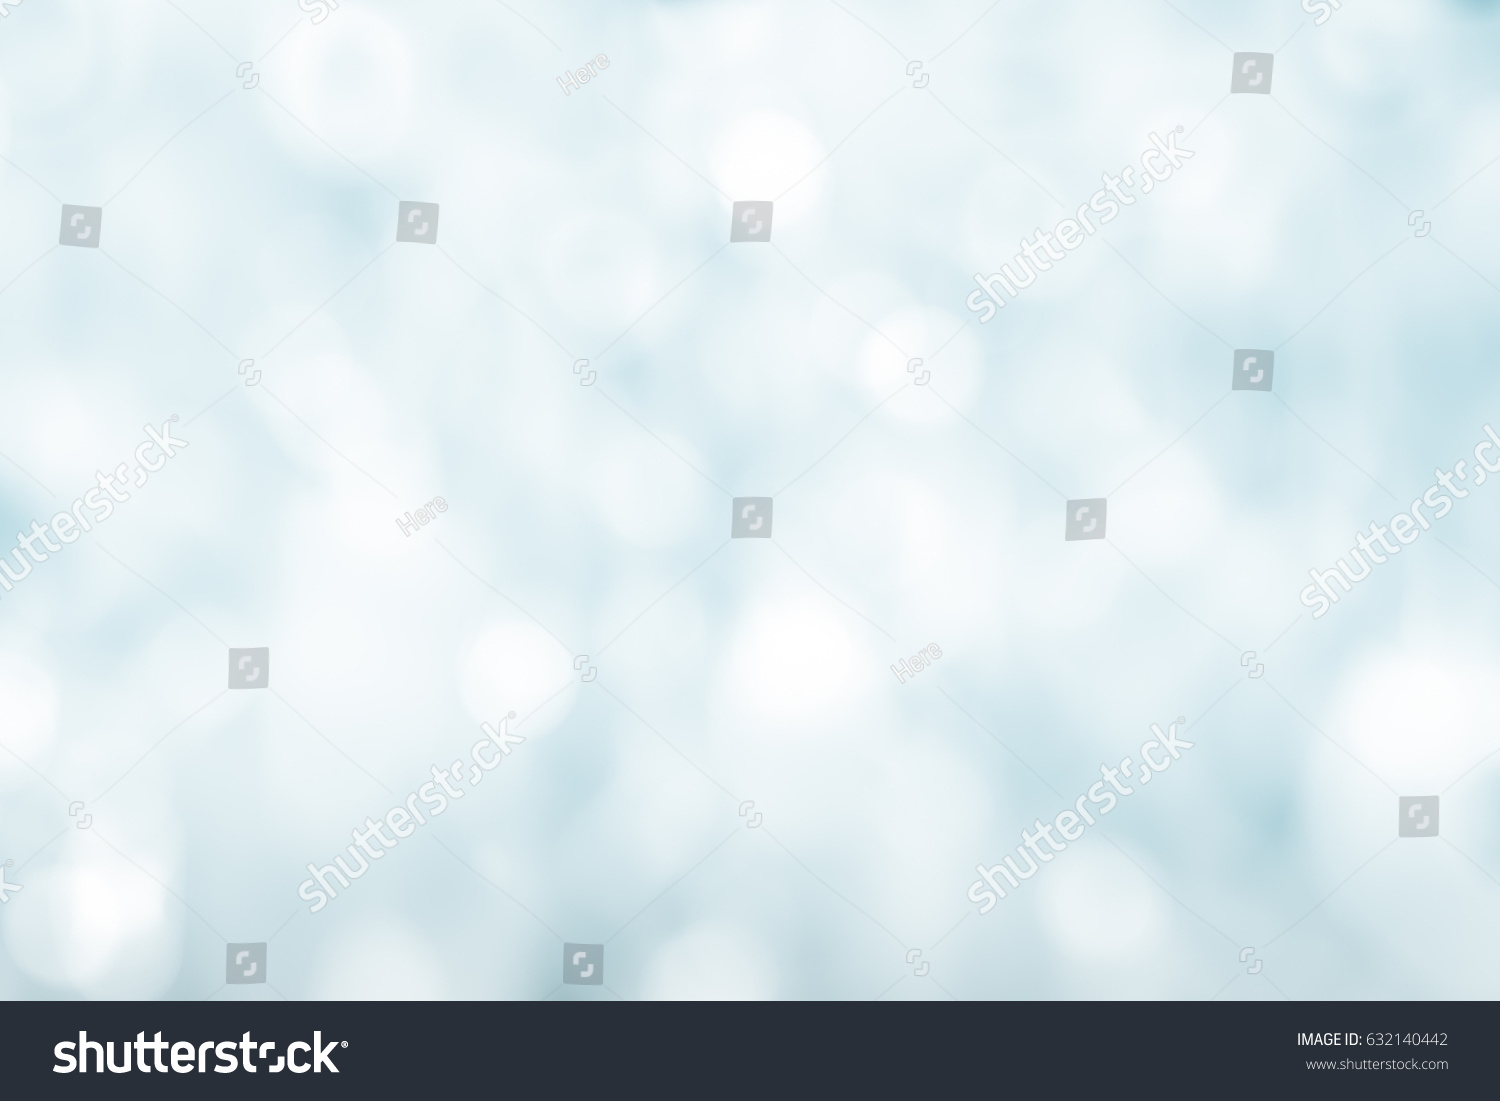 COLD LIGHT BACKGROUND, ABSTRACT CIRCLE PATTERN #632140442